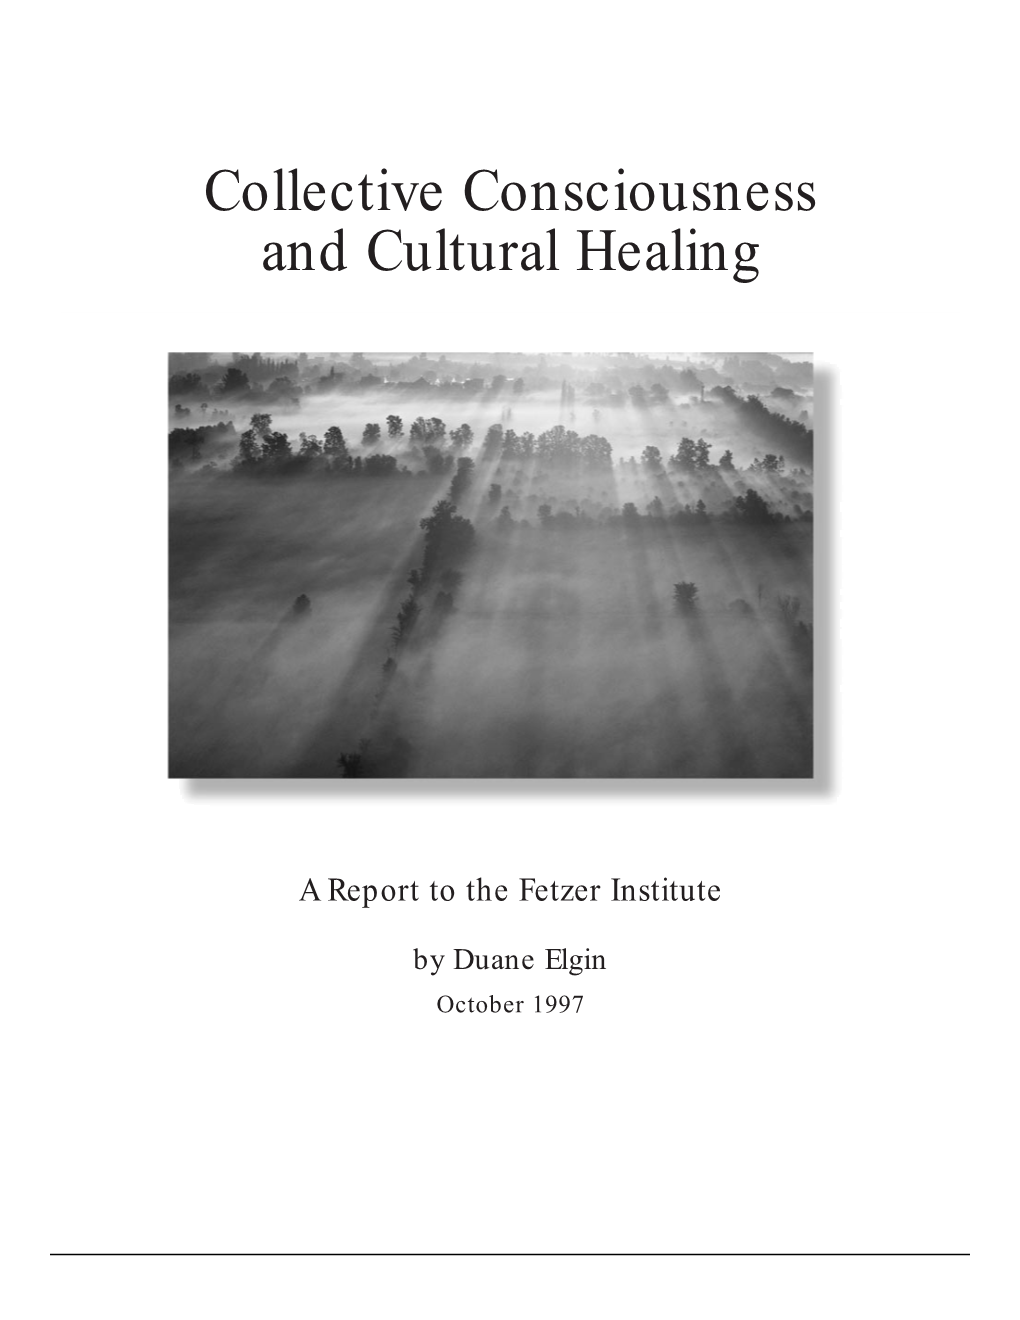 Collective Consciousness and Cultural Healing